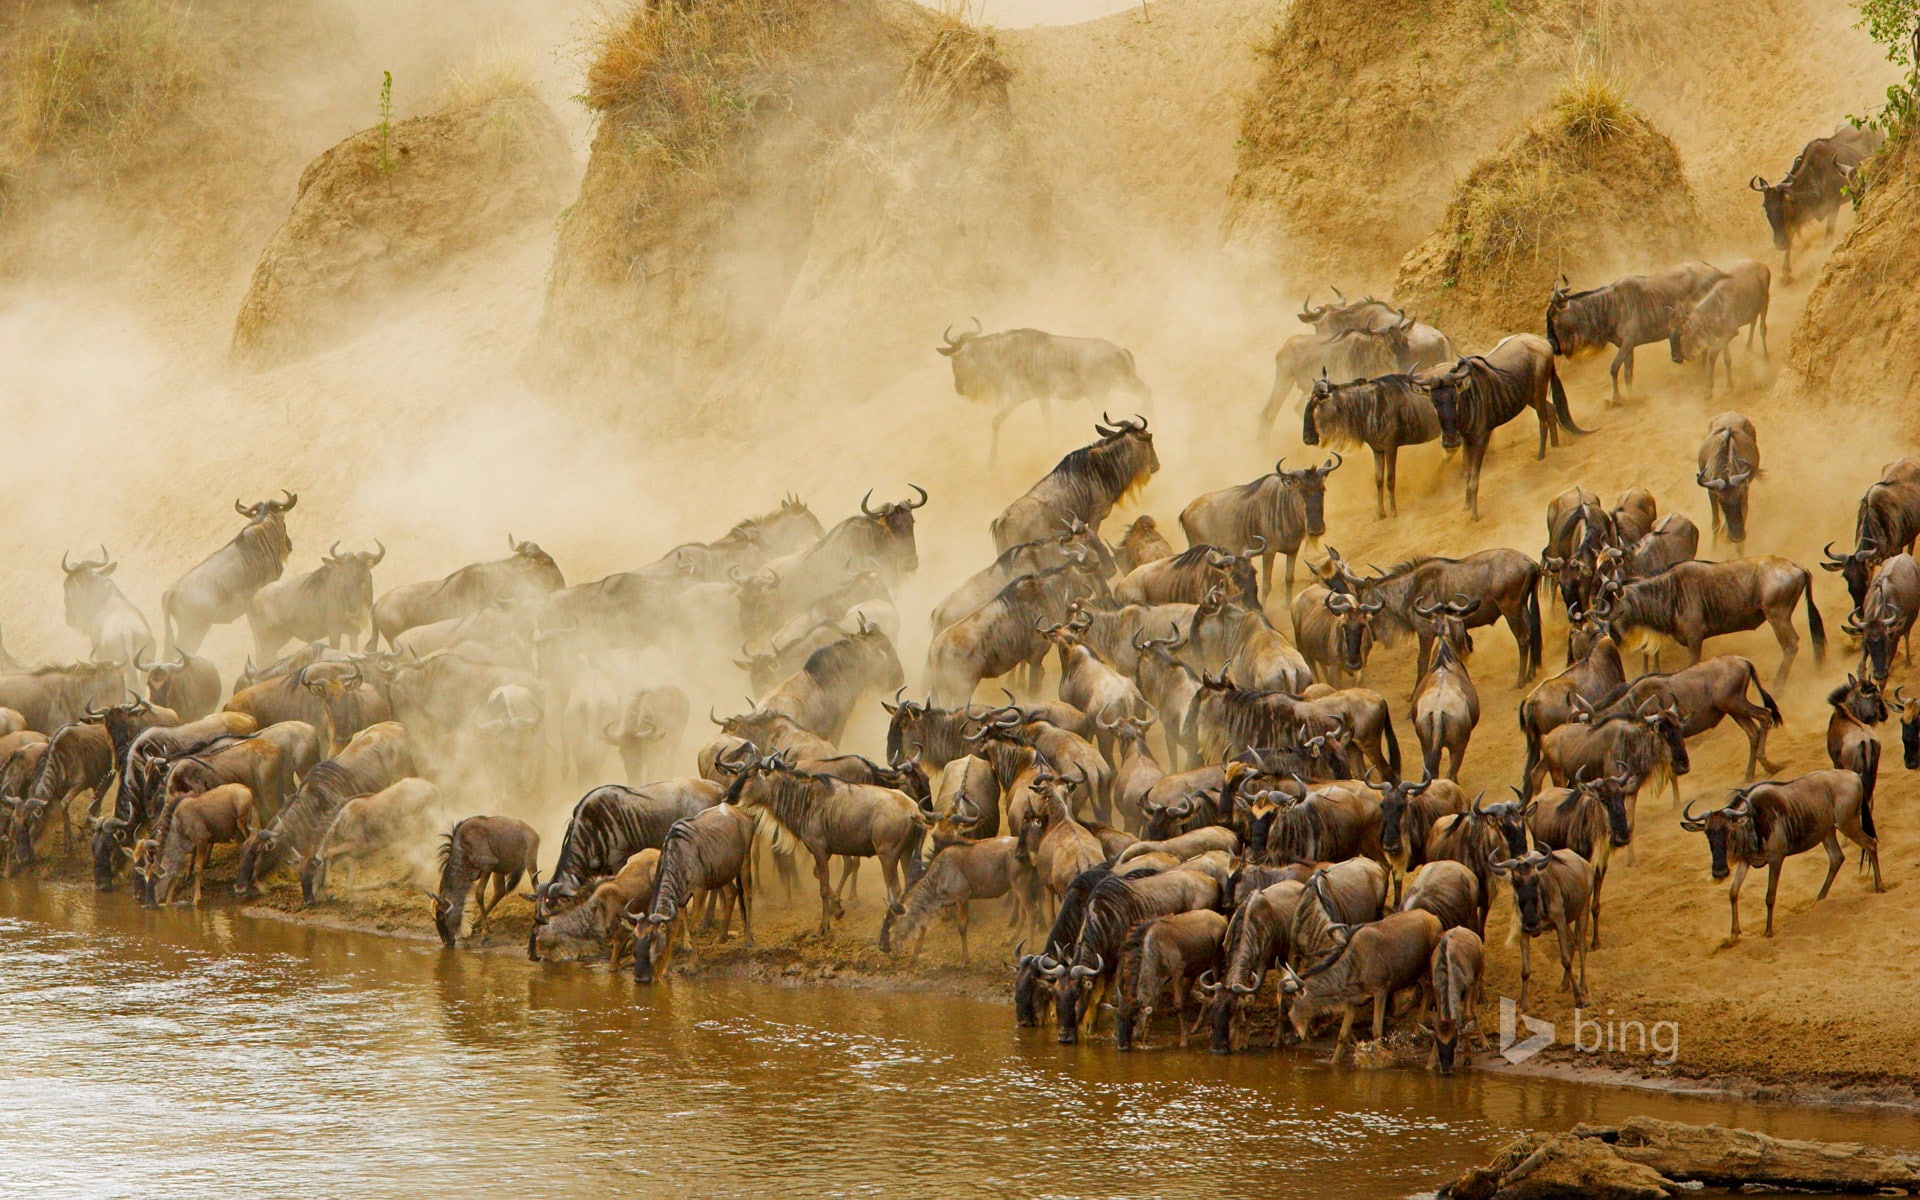 Migratory herds-2015 Bing theme wallpaper, large group of animals